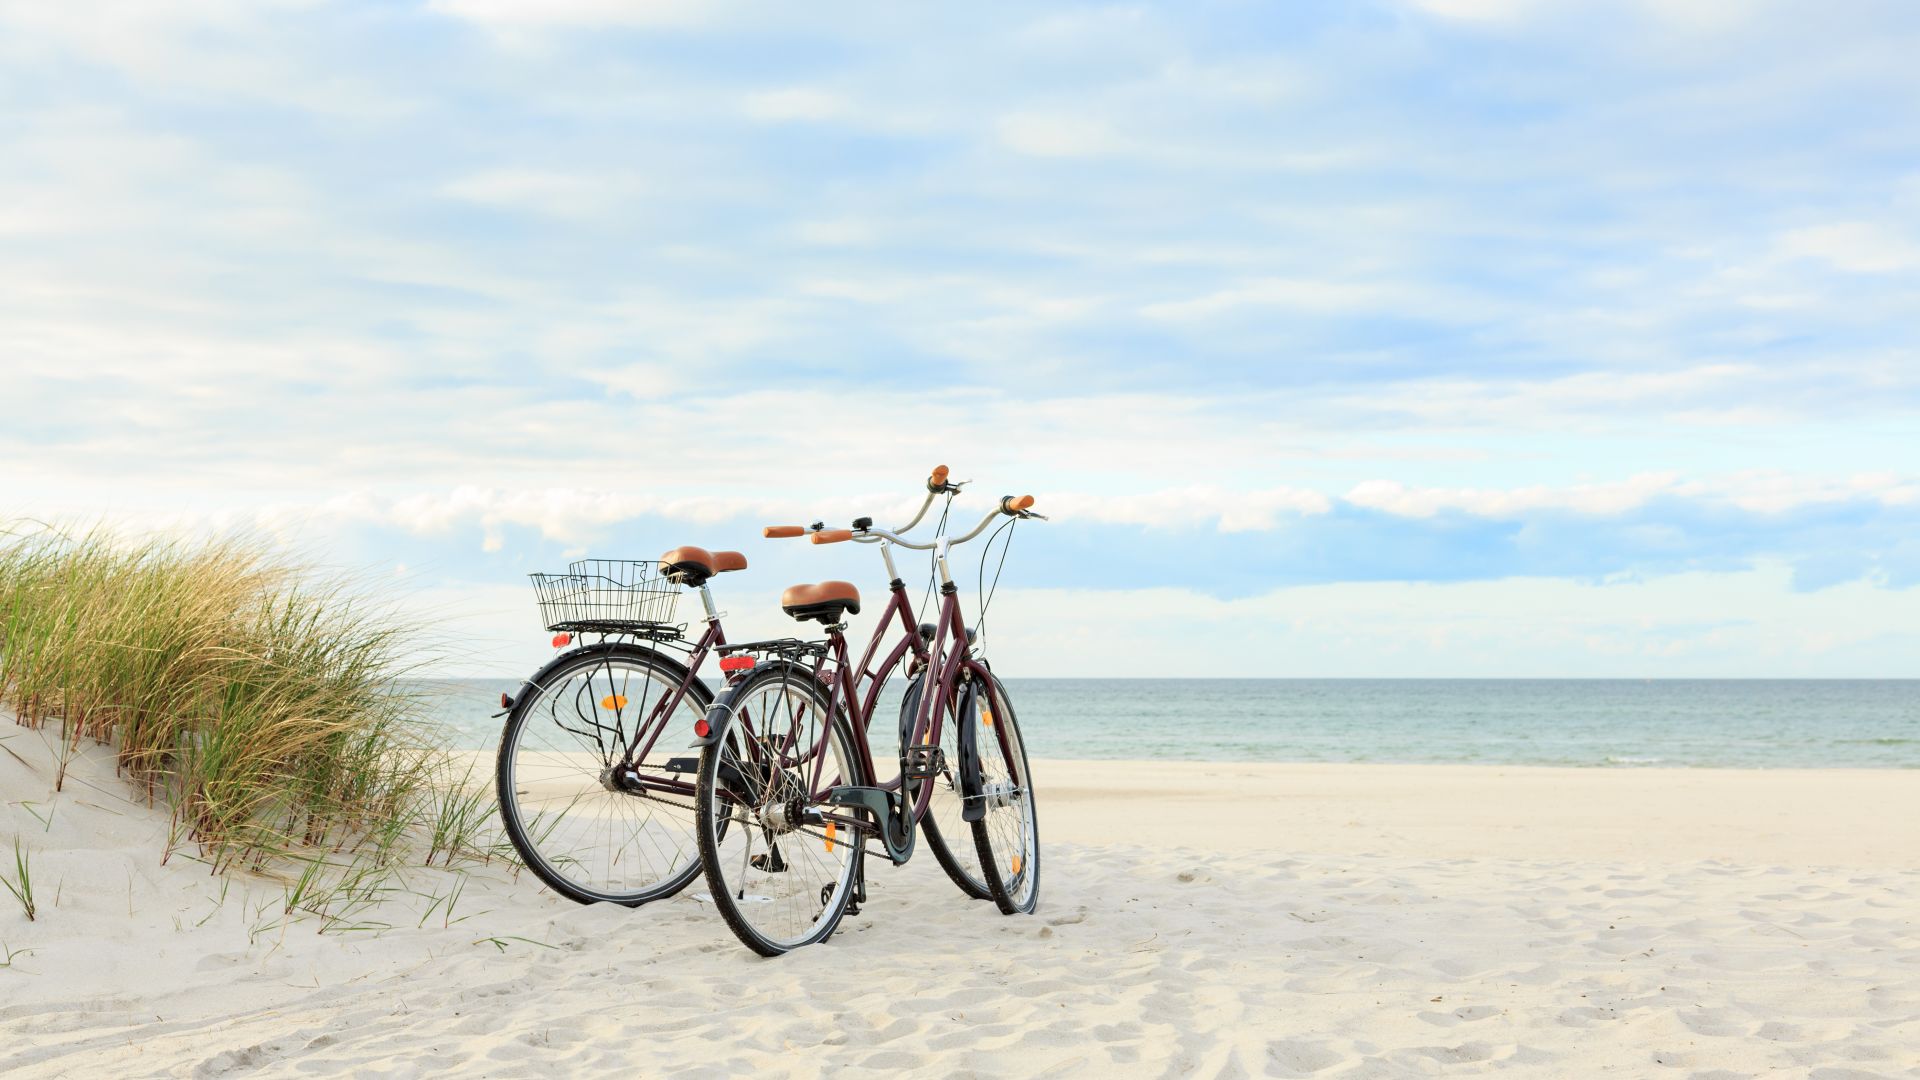 A Group Of Bikes Parked On A Beach